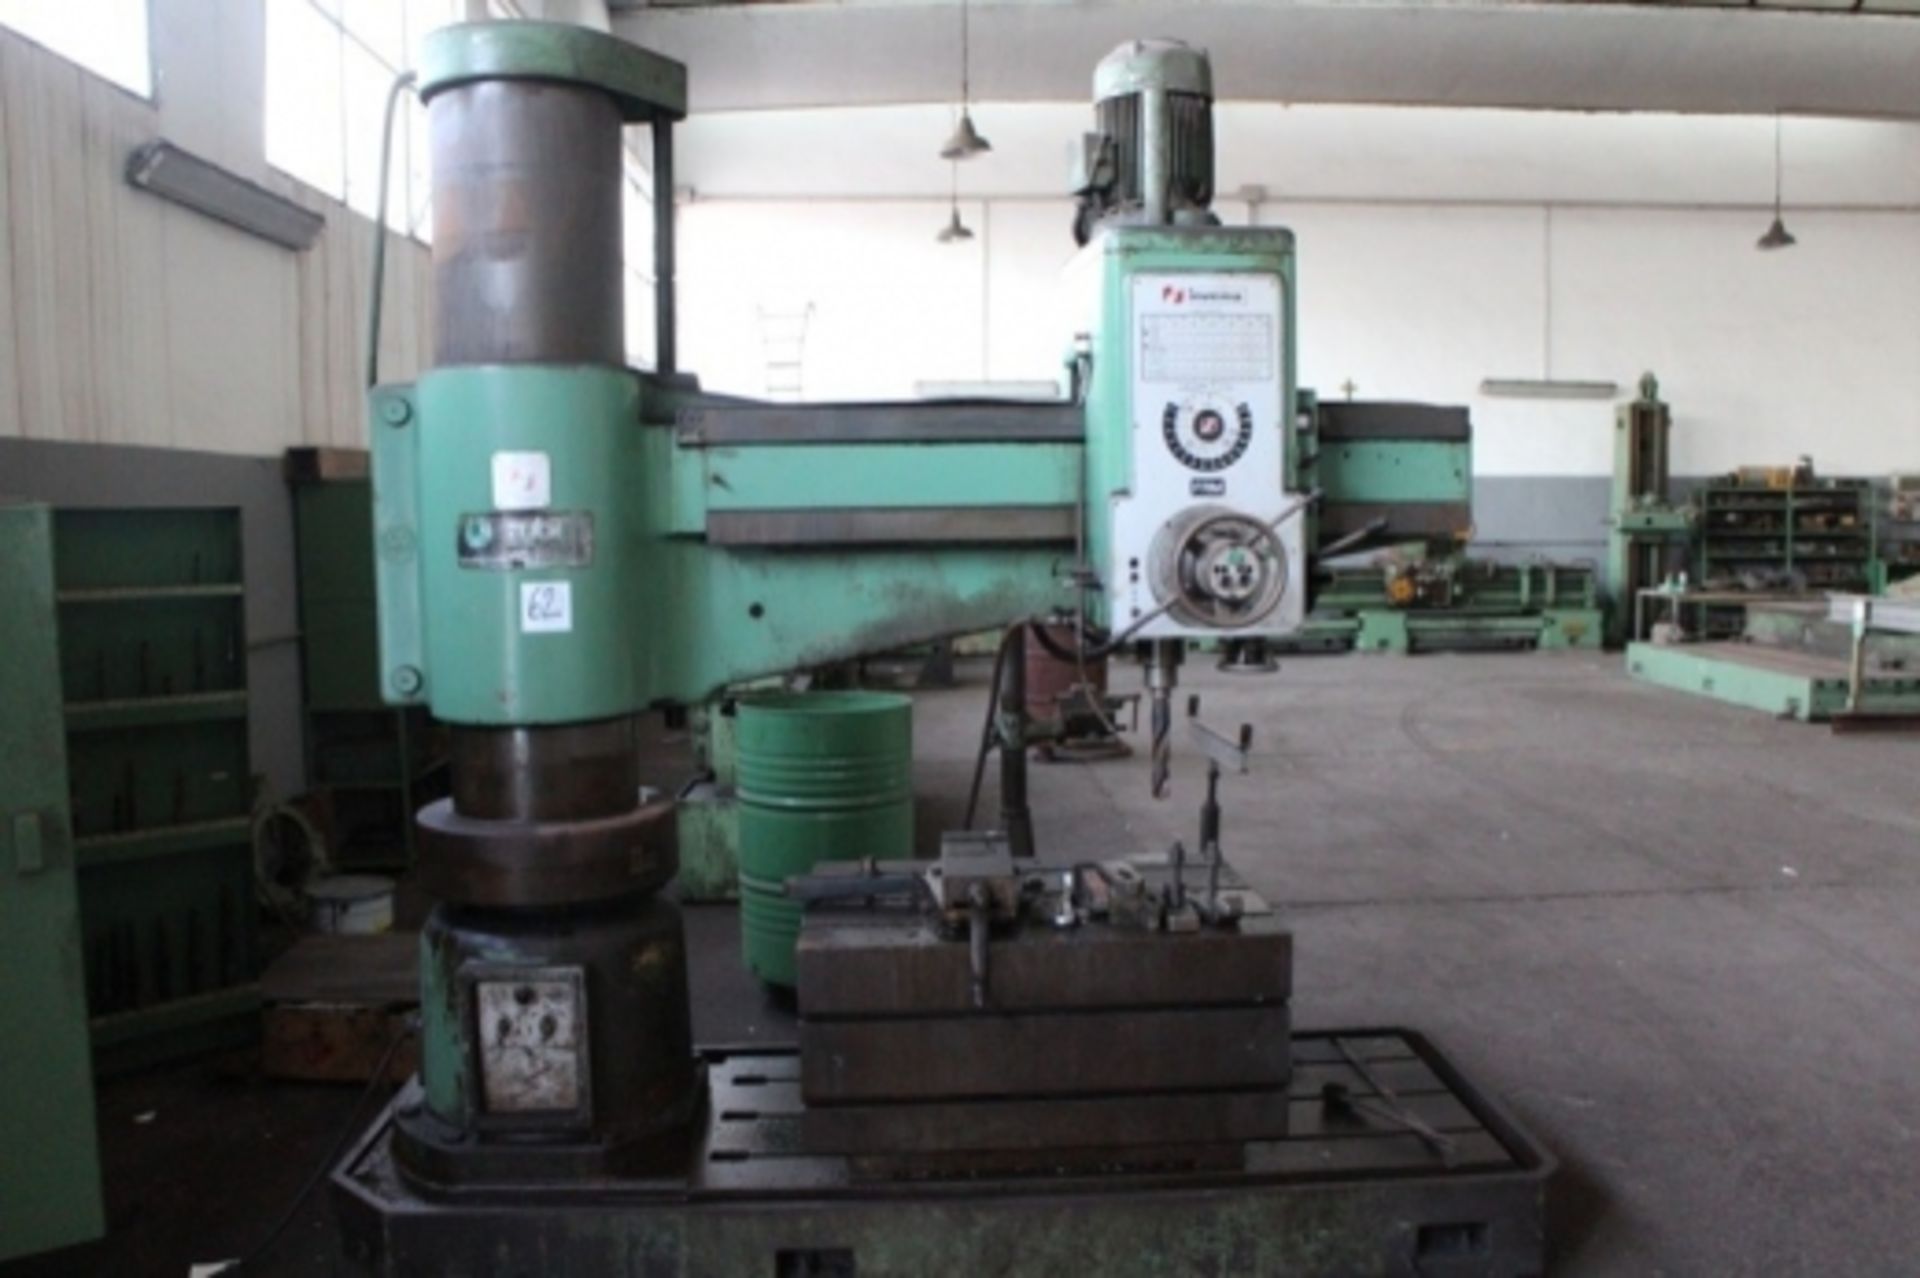 1,RADIAL DRILL BRAND INVEMA, SERIAL NUMBER. 2020B6, COMPLETE WITH CABINET WITH ACCESSORIES Click